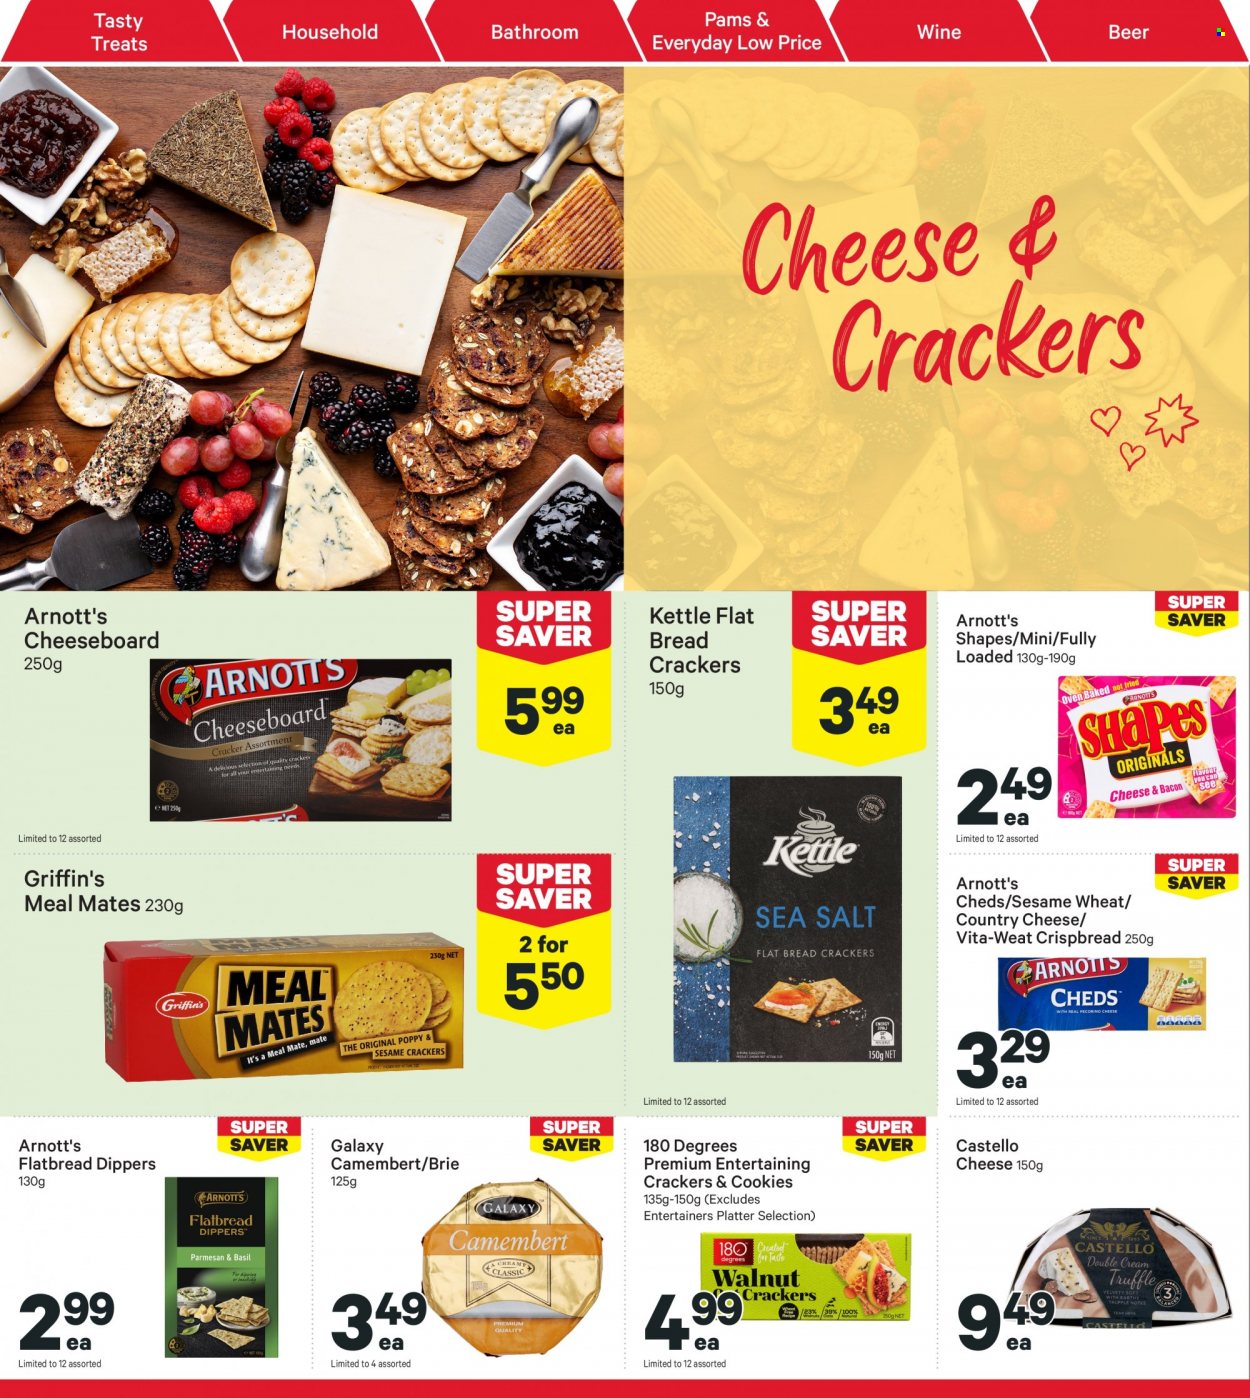 thumbnail - New World mailer - 28.11.2022 - 04.12.2022 - Sales products - bread, flatbread, crispbread, bacon, camembert, parmesan, Pecorino, brie, cookies, truffles, crackers, Griffin's, wine, beer. Page 24.